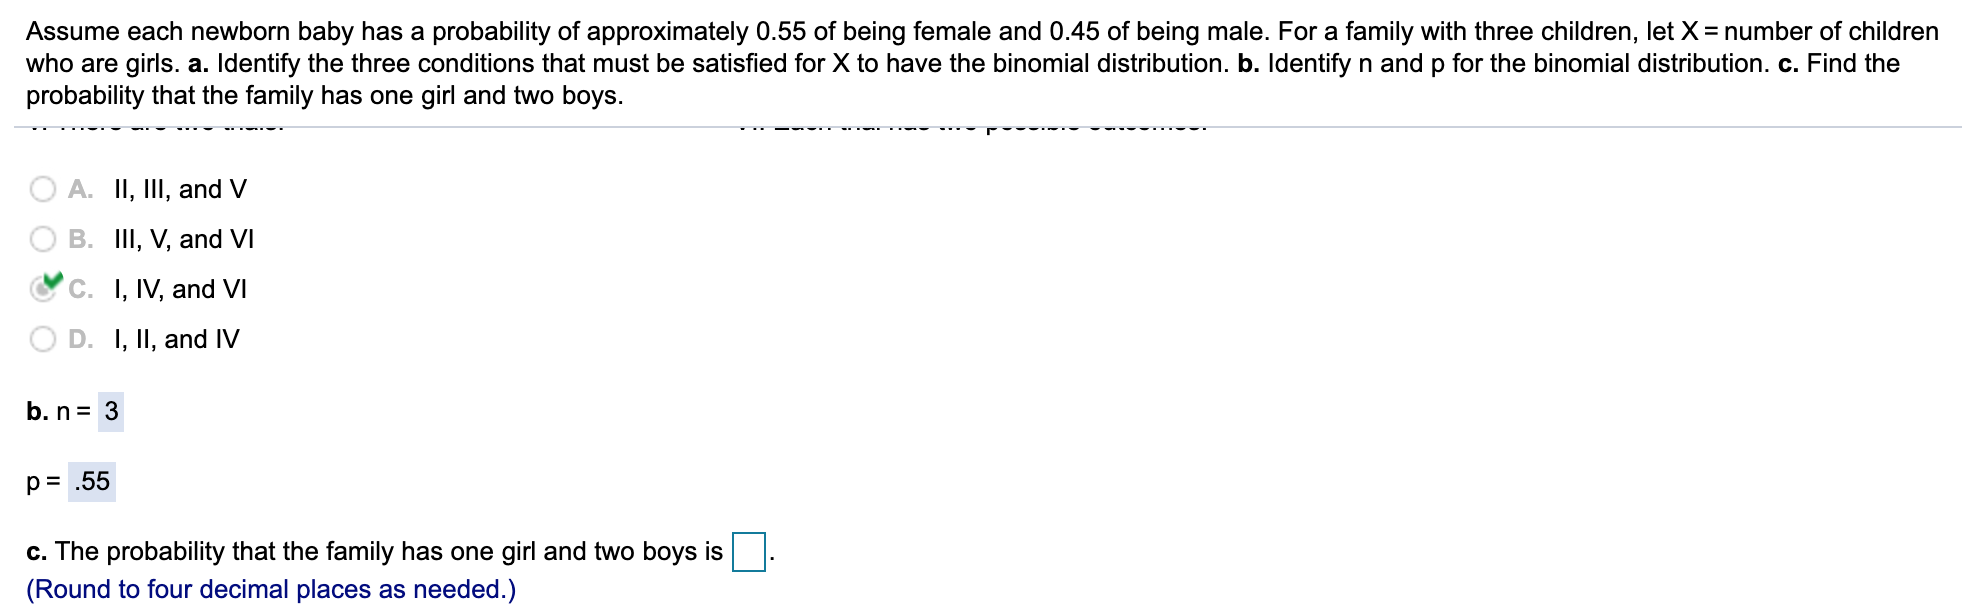 Assume each newborn baby has a probability of approximately 0.55 of being female and 0.45 of being male. For a family with three children, let )
who are girls. a. Identify the three conditions that must be satisfied for X to have the binomial distribution. b. Identify n and p for the binomial distribution. c. Find the
probability that the family has one girl and two boys.
= number of children
A. II, III, and V
B. III, V, and VI
C. I, IV, and VI
D. I, II, and V
b. n= 3
p = .55
c. The probability that the family has one girl and two boys is
(Round to four decimal places as needed.)
